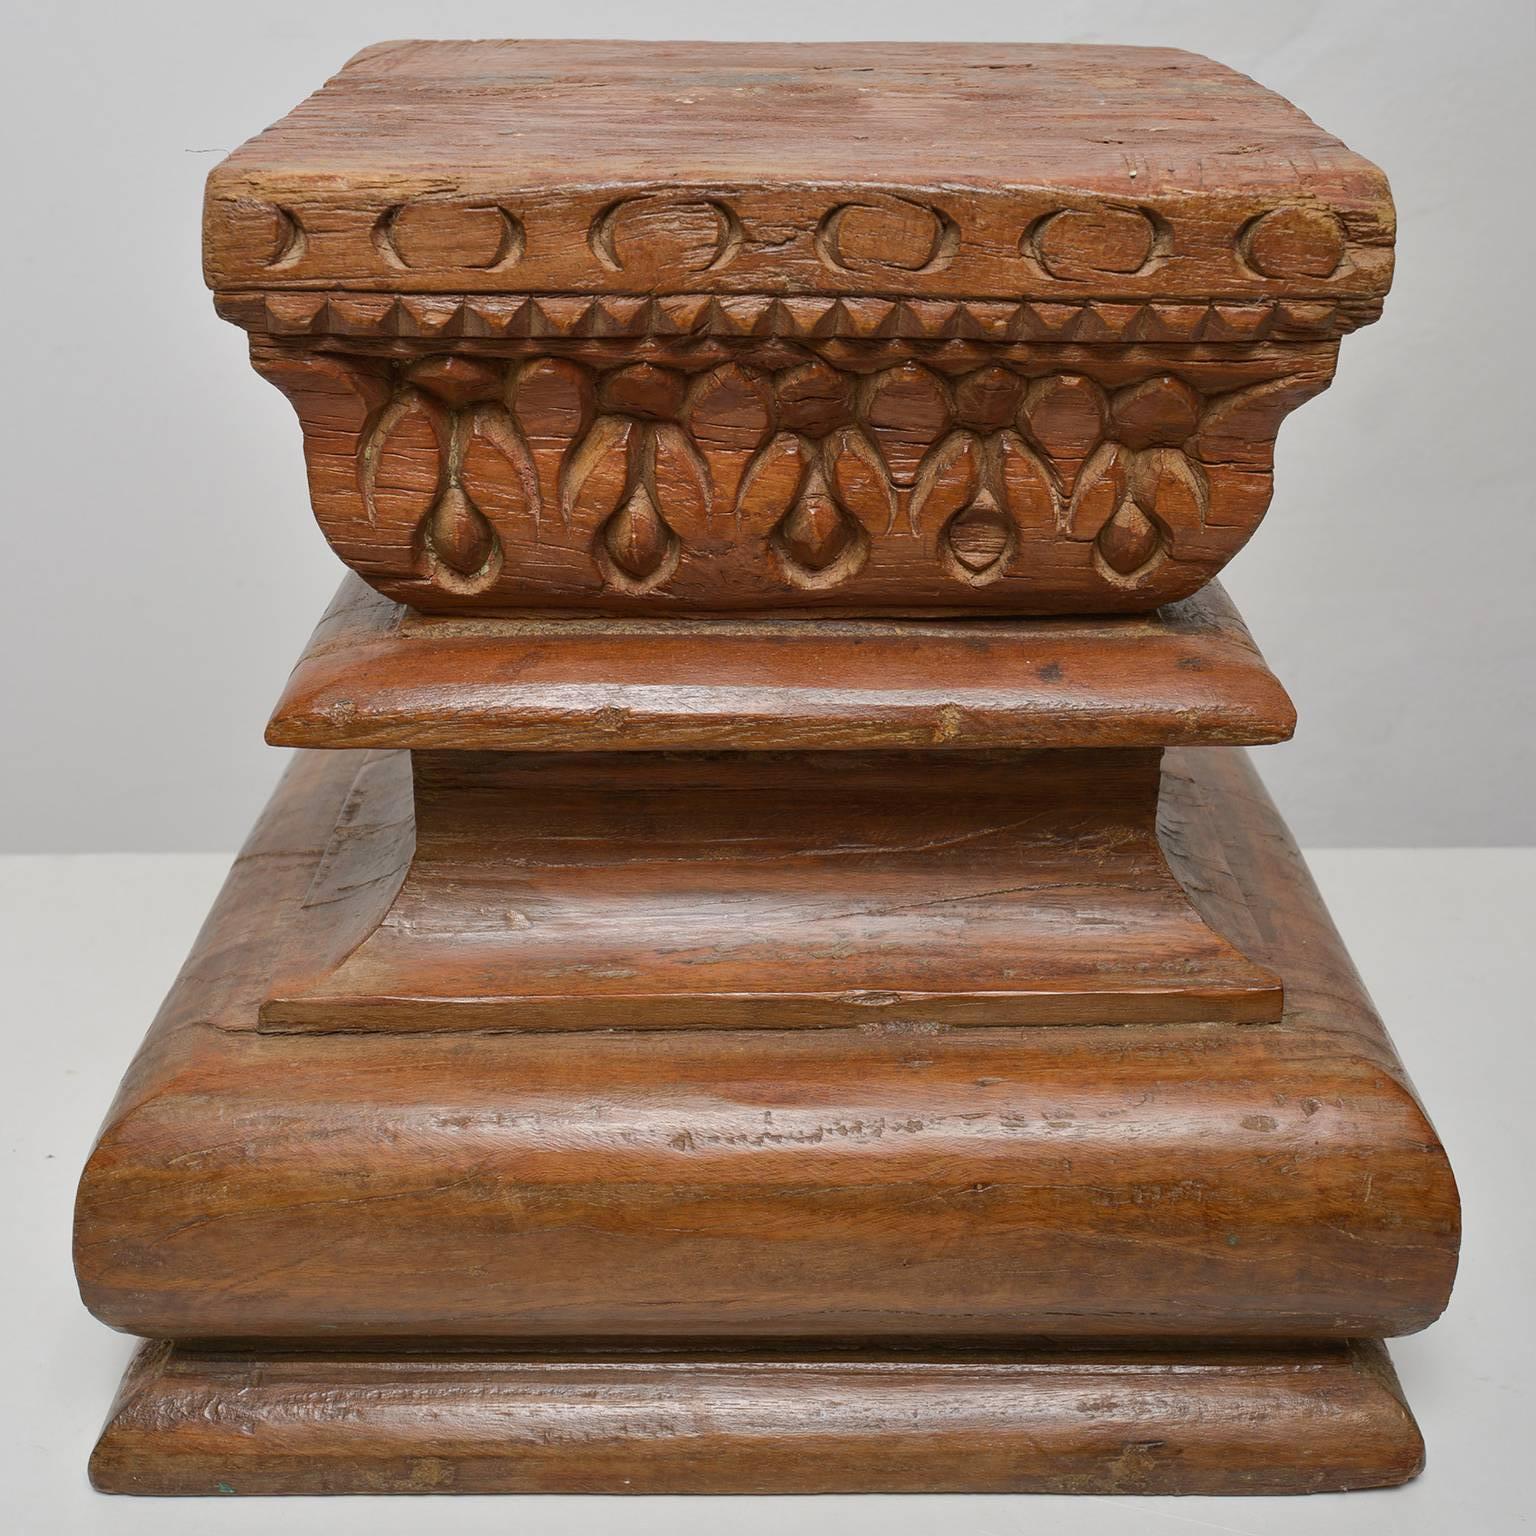 Little side table or stool, made with two old Asian capitals -
M/364-1.